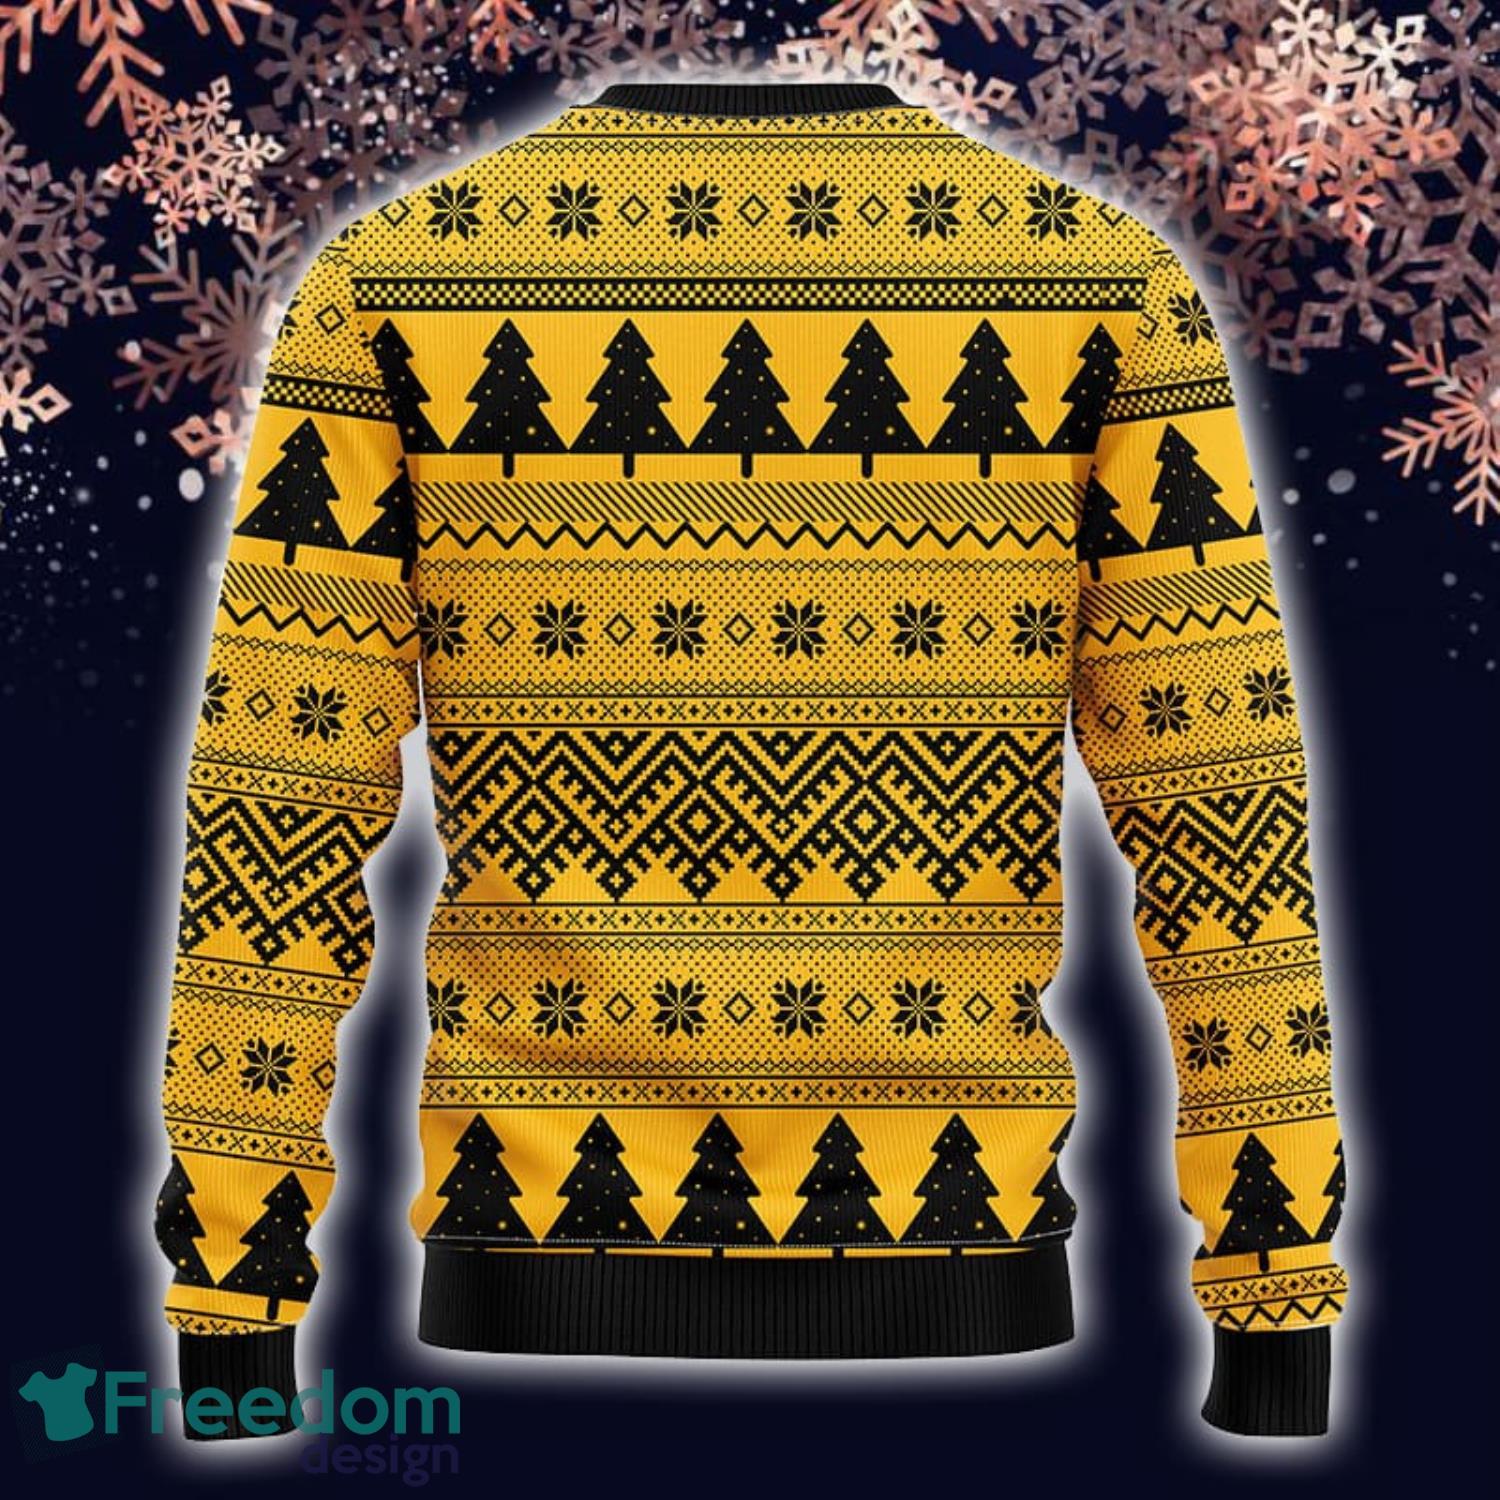 MLB Pittsburgh Pirates Funny Minion Ugly Christmas Sweater For Fans -  Freedomdesign